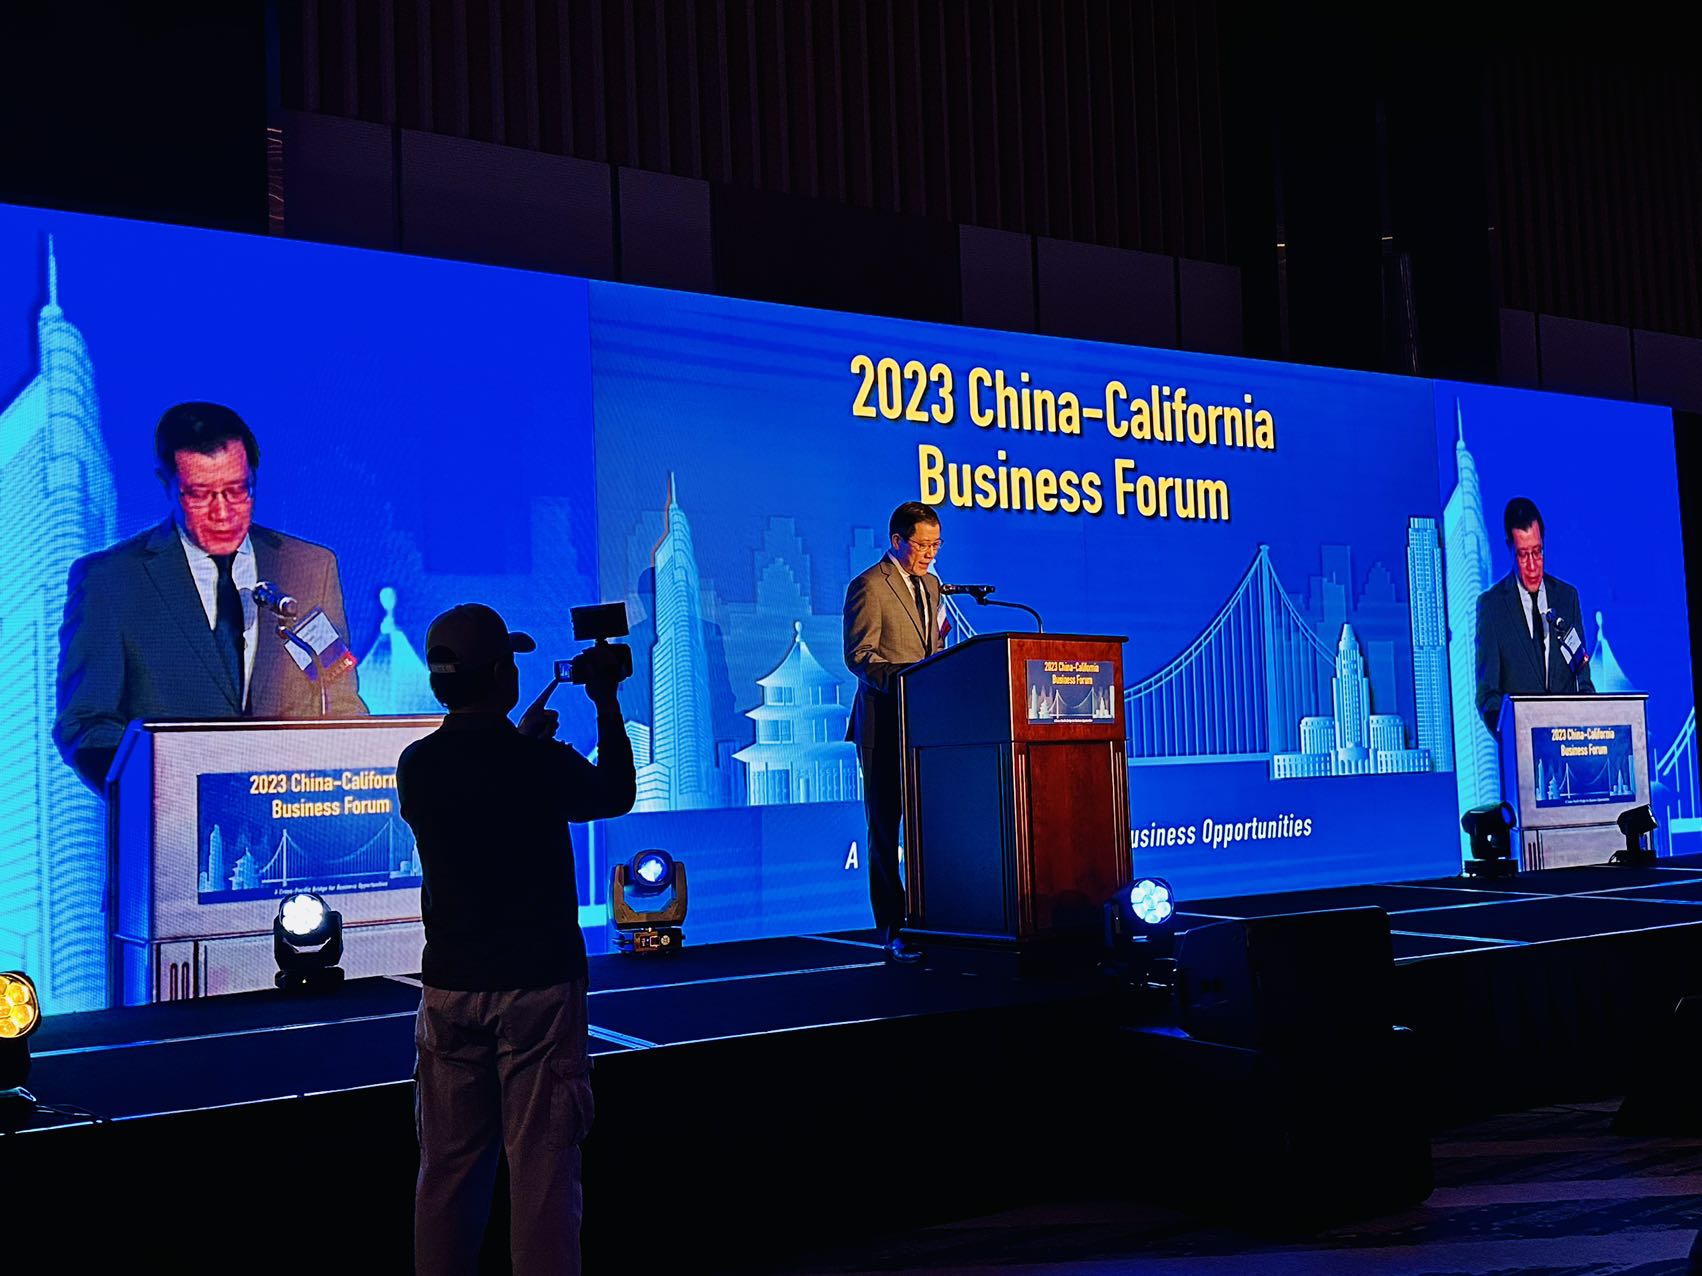 UCCTC hosts Cleantech Sub Forum at the 2023 China - California Business Forum